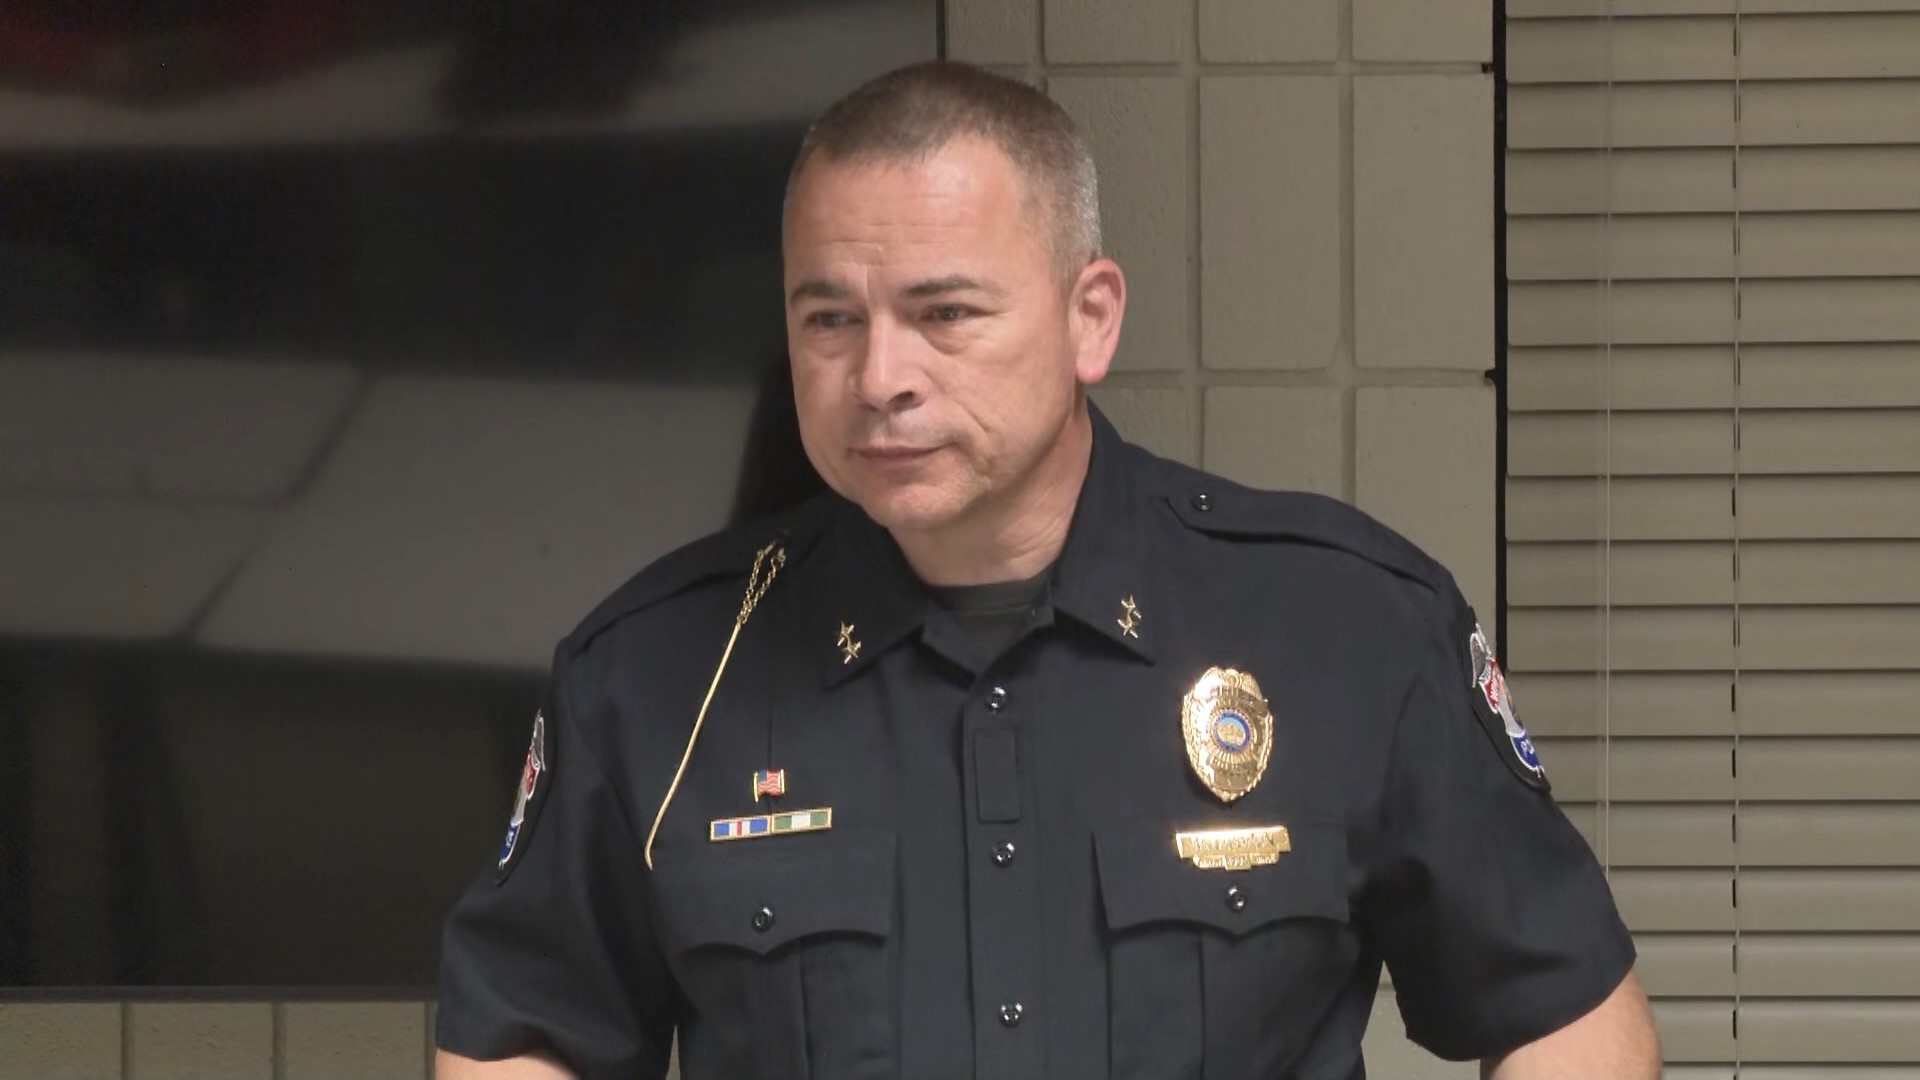 Whitehall Police Chief Mike Crispen discussed what led to an officer fatally shooting a suspect early Friday morning.